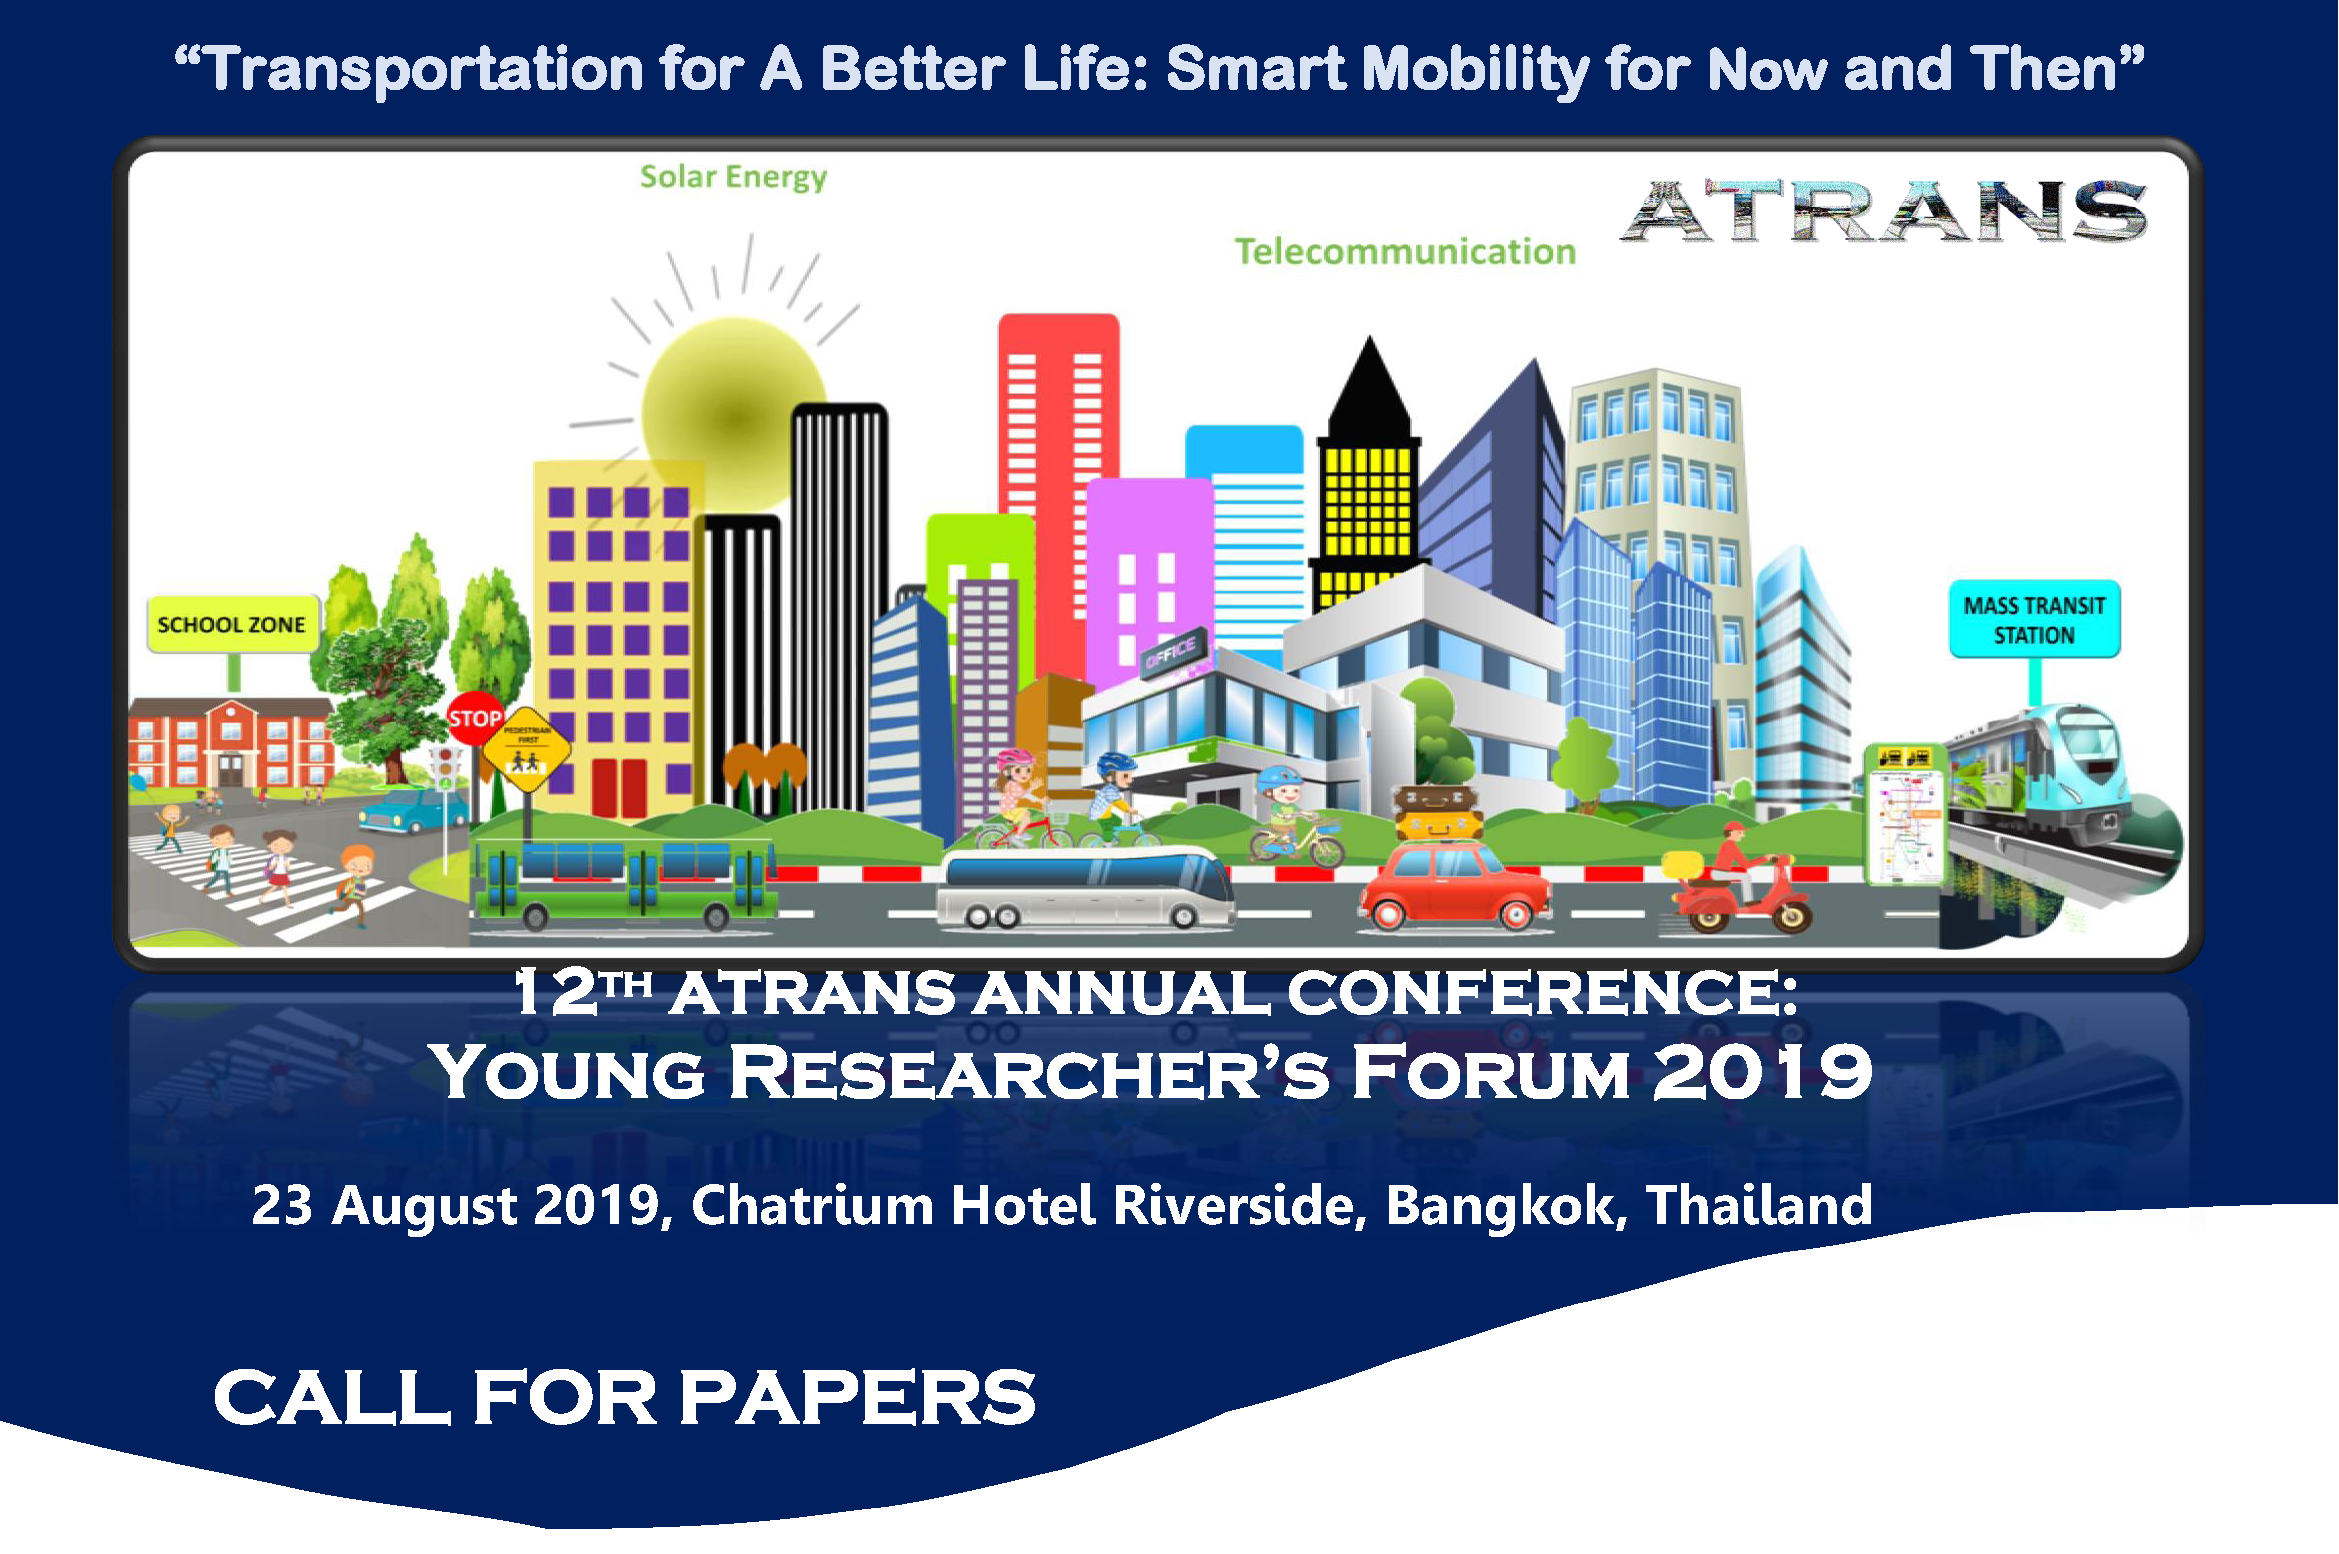 12th ATRANS Annual Conference: